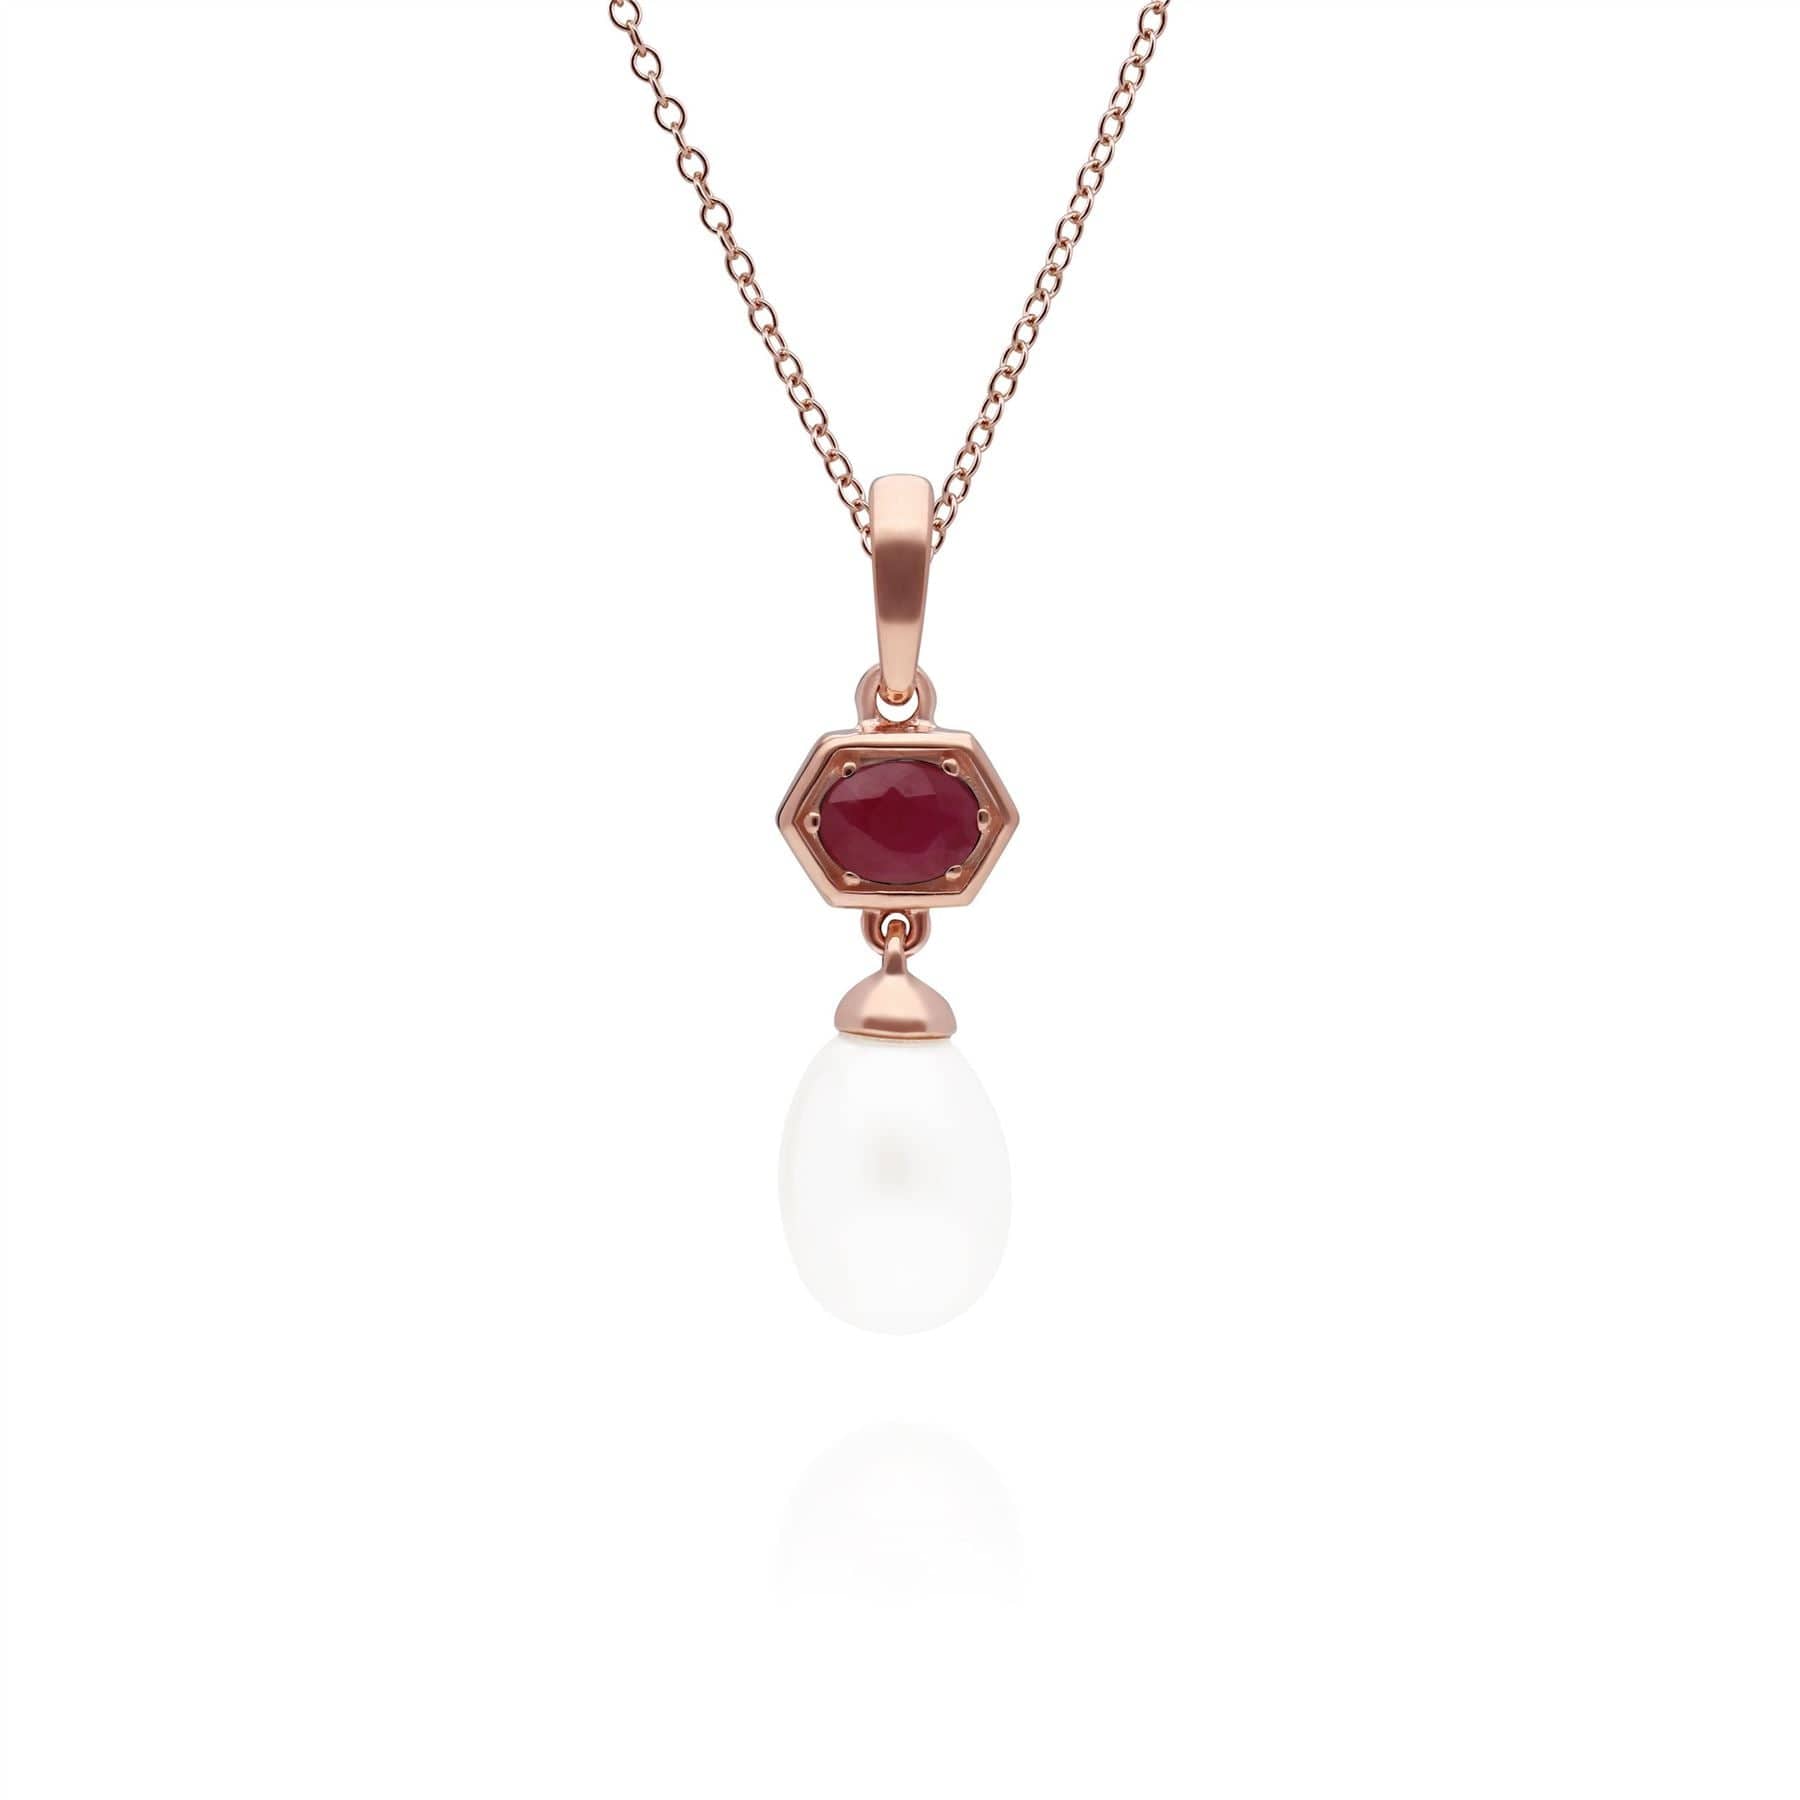 Photos - Pendant / Choker Necklace Modern Pearl & Ruby Hexagon Drop Pendant in Rose Gold Plated Silver